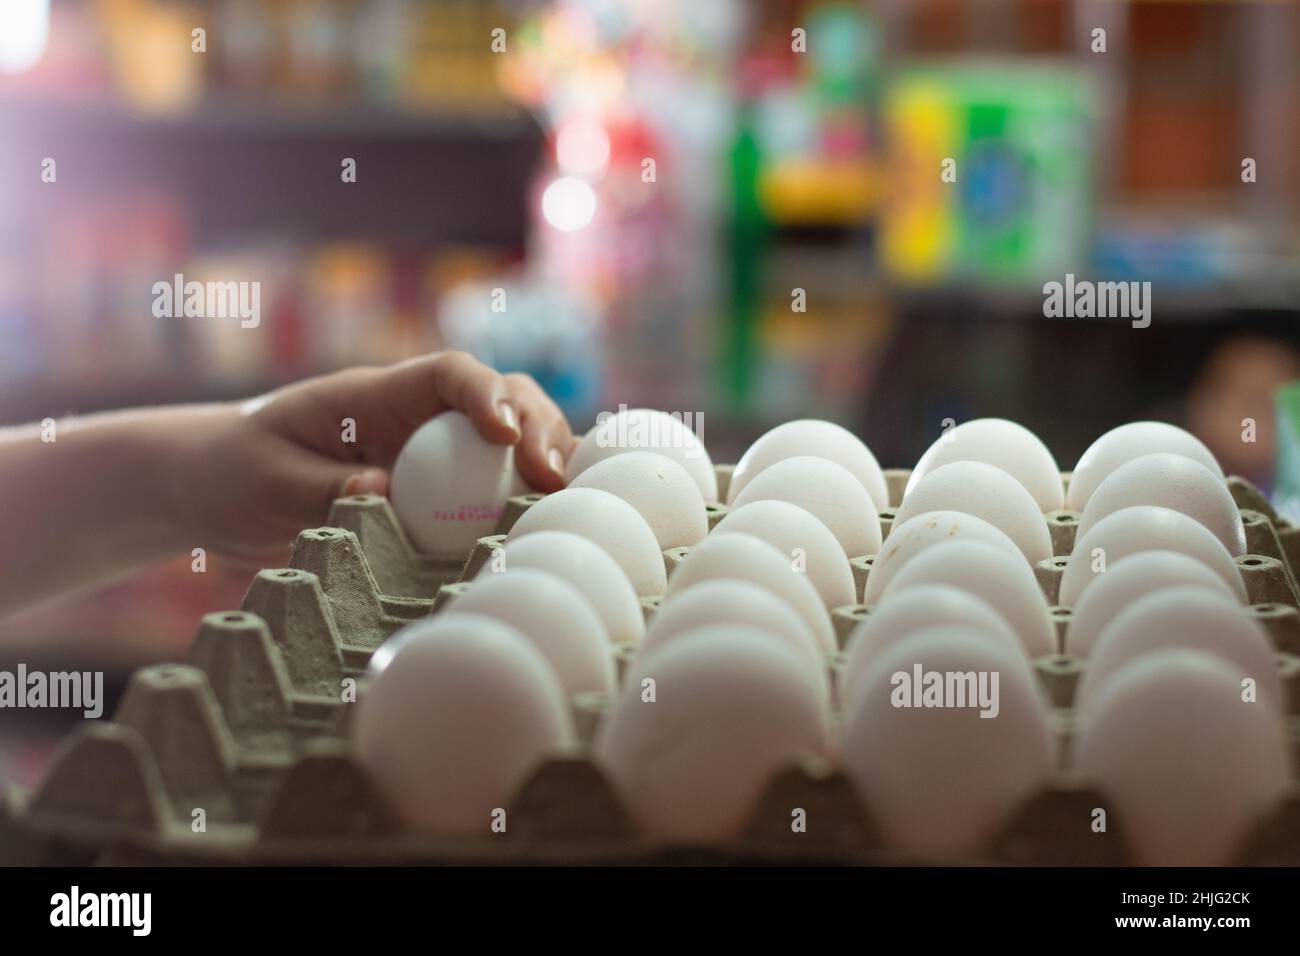 hand of a woman holding white chicken eggs, placed in an egg carton. sale of eggs in a grocery store. eggs rich in protein albumin ready to be sold an Stock Photo